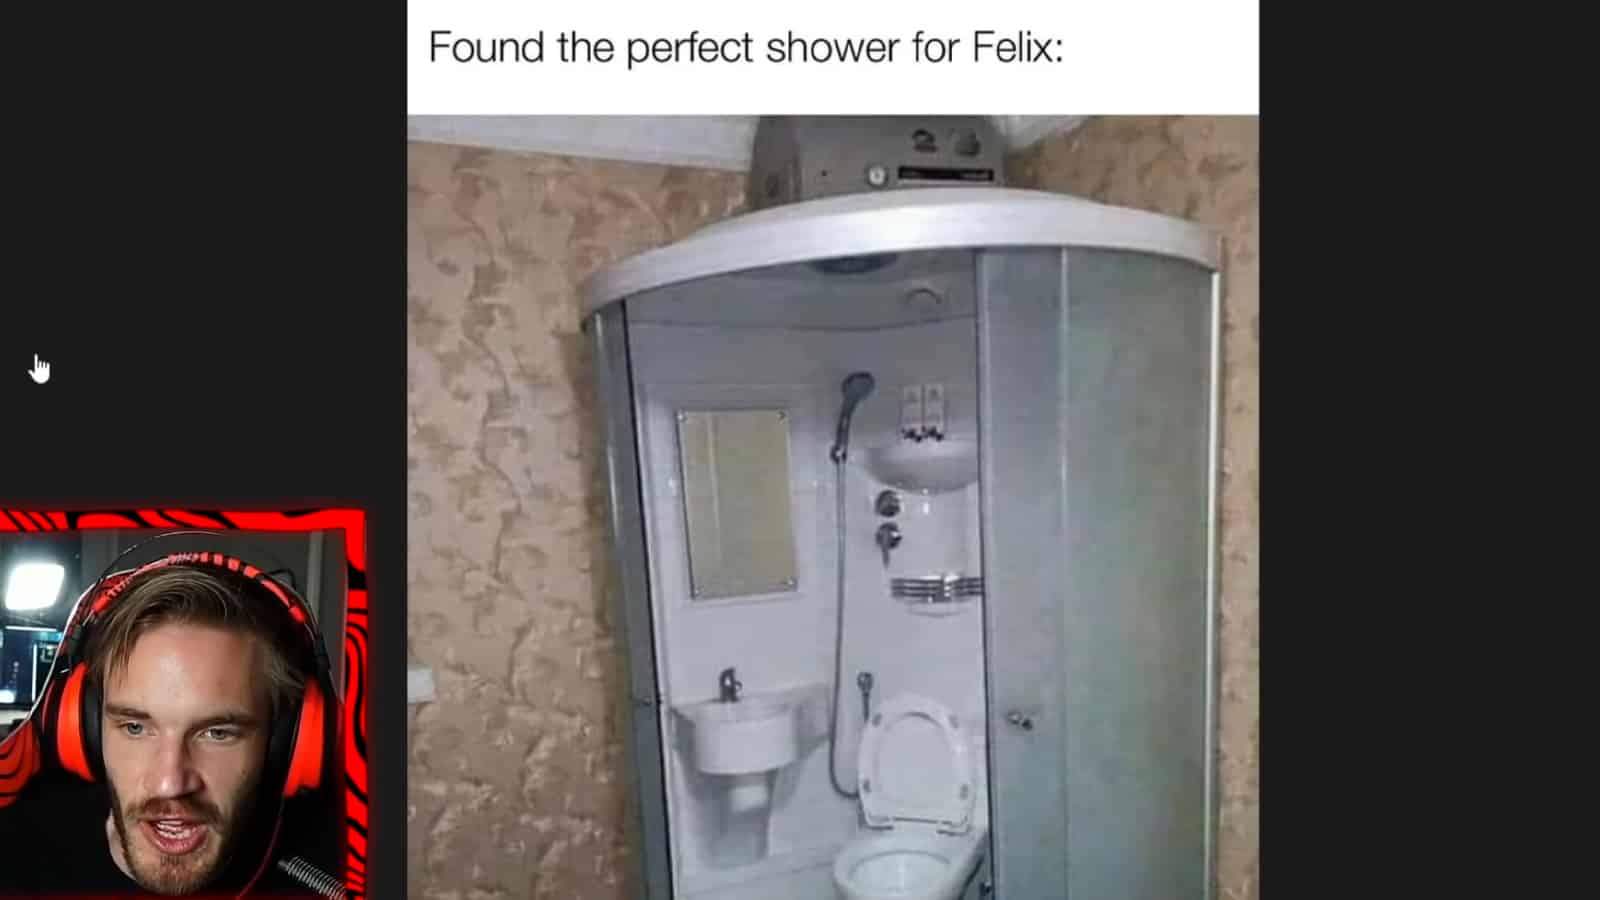 PewDiePie reacts to Shower memes